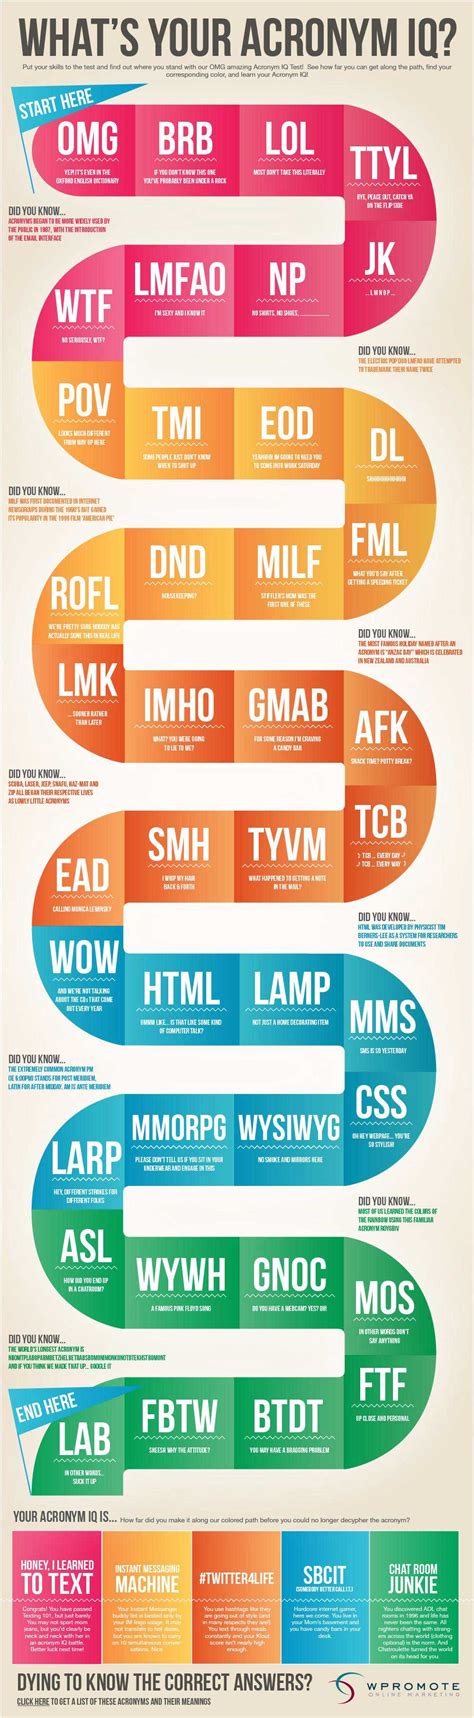 Pronounceable acronyms (umno, nato, asean) are thought of as more like real names and therefore don't take the. Social Media - What's Your Acronym IQ? [Infographic ...